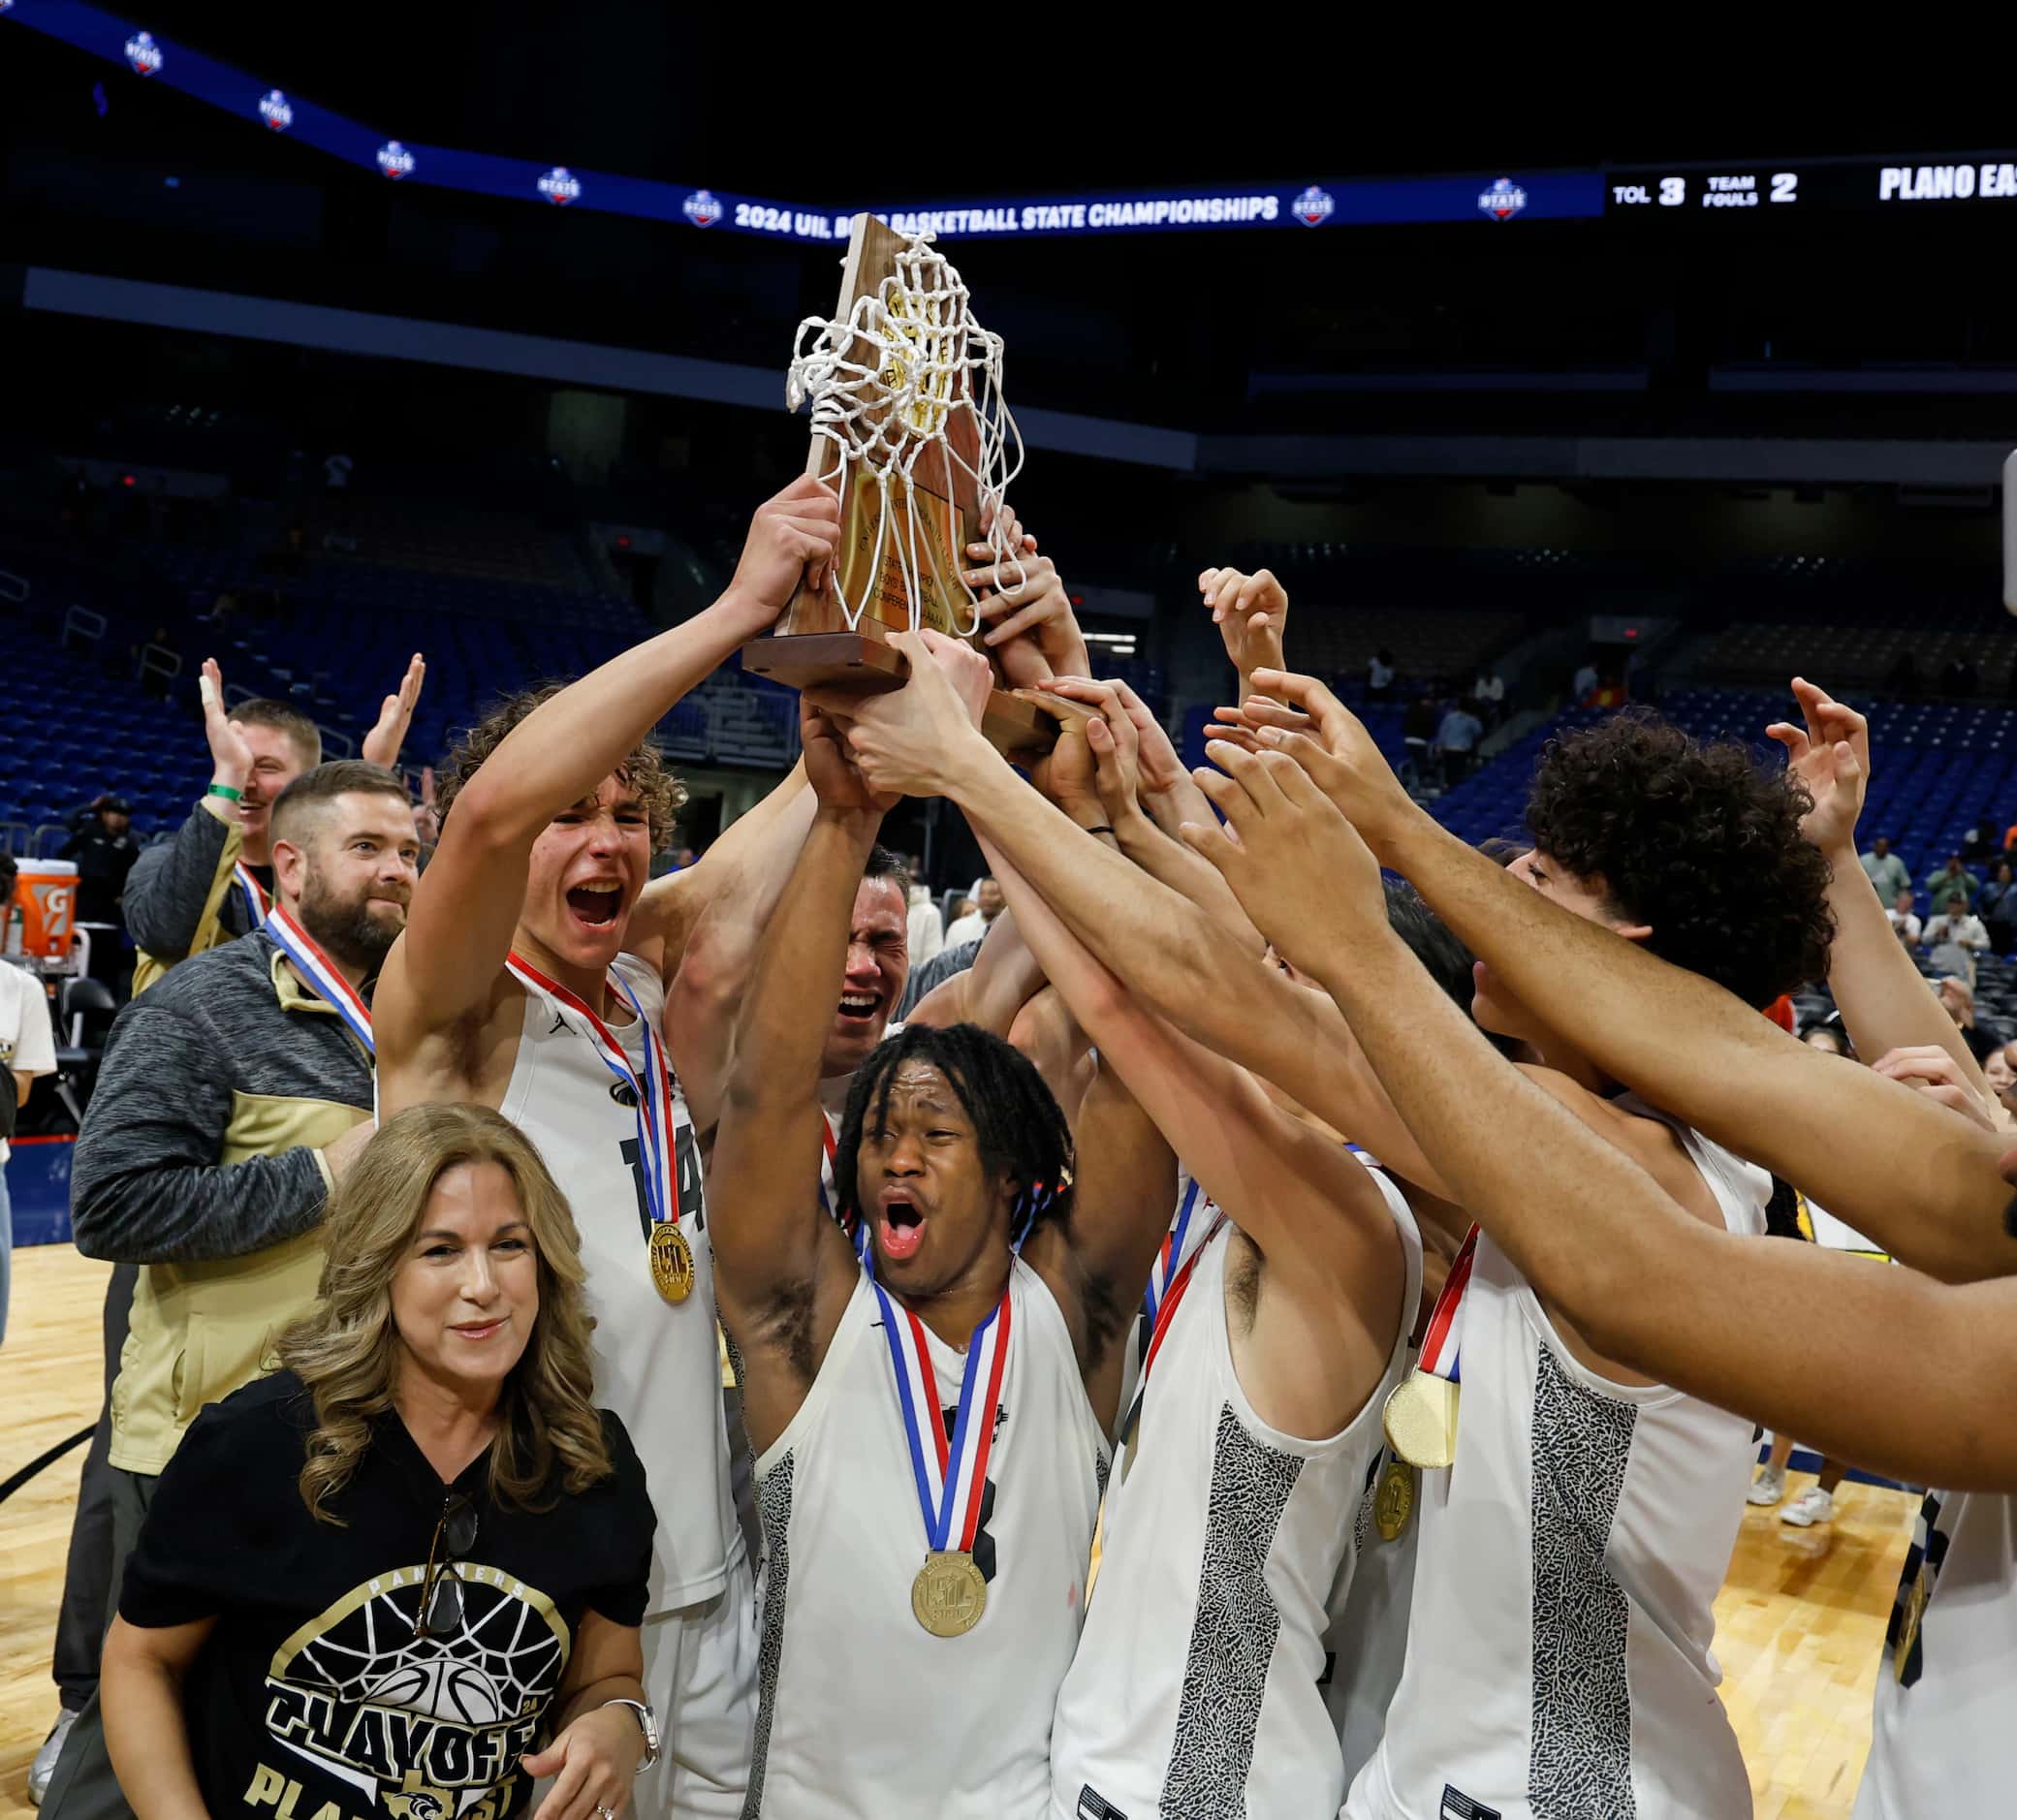 Plano East celebrates with its trophy after defeating Round Rock Stony Point 53-41 in the...